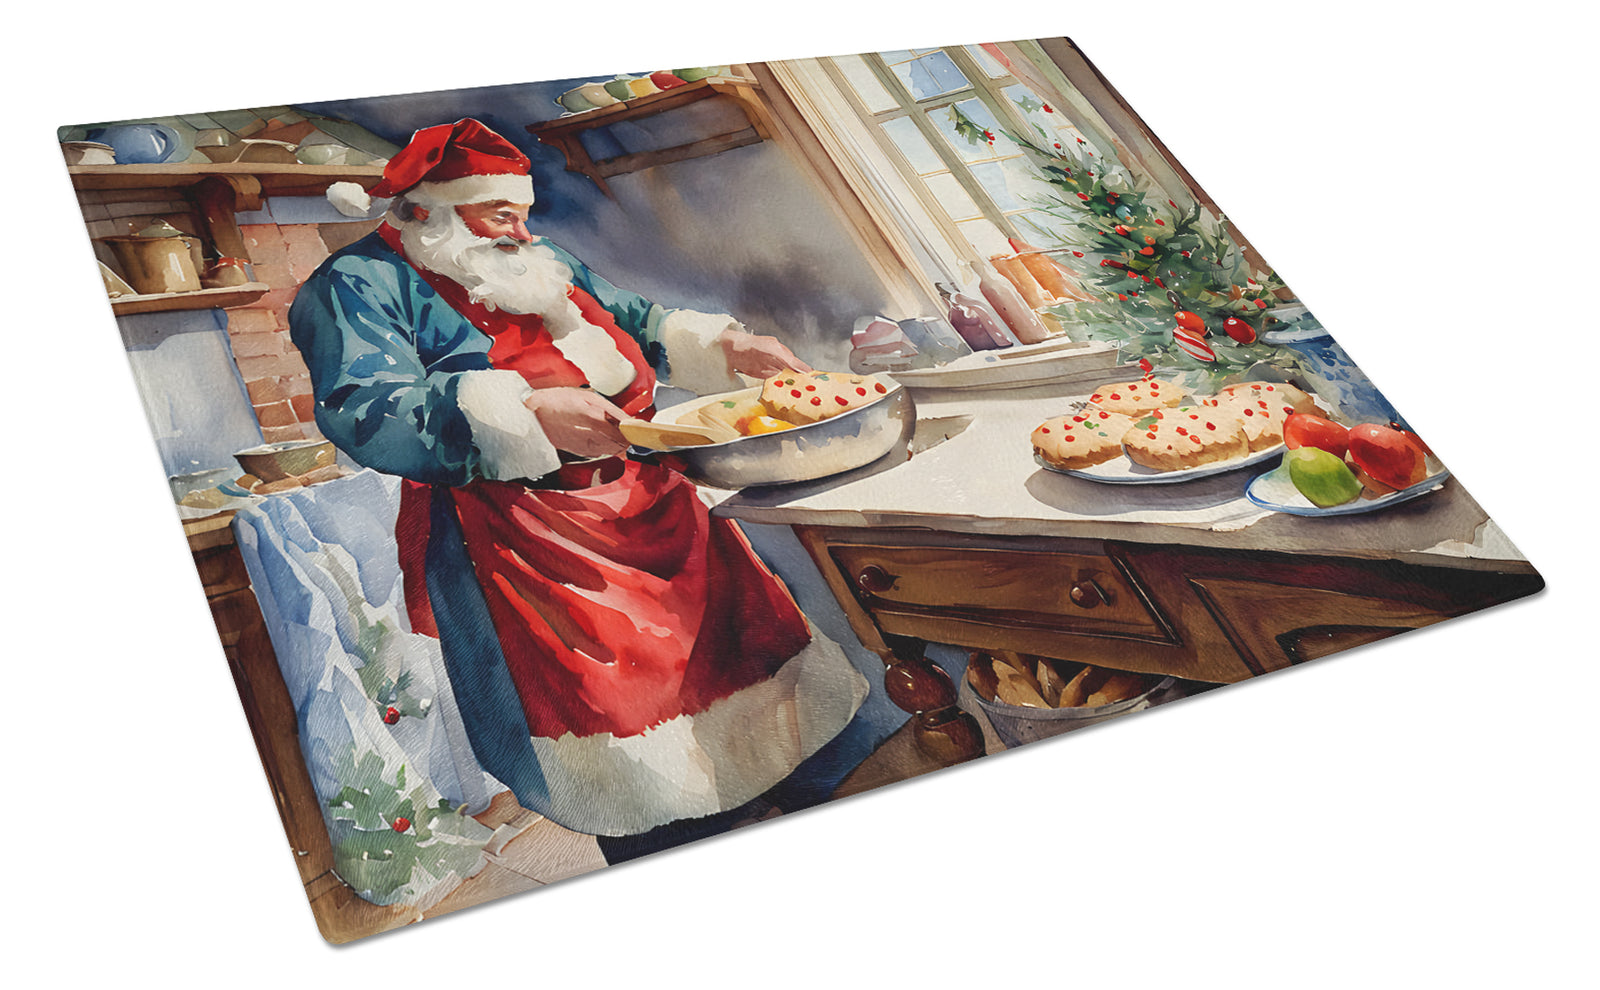 Buy this Cookies with Santa Claus Babbo Natale Glass Cutting Board Large